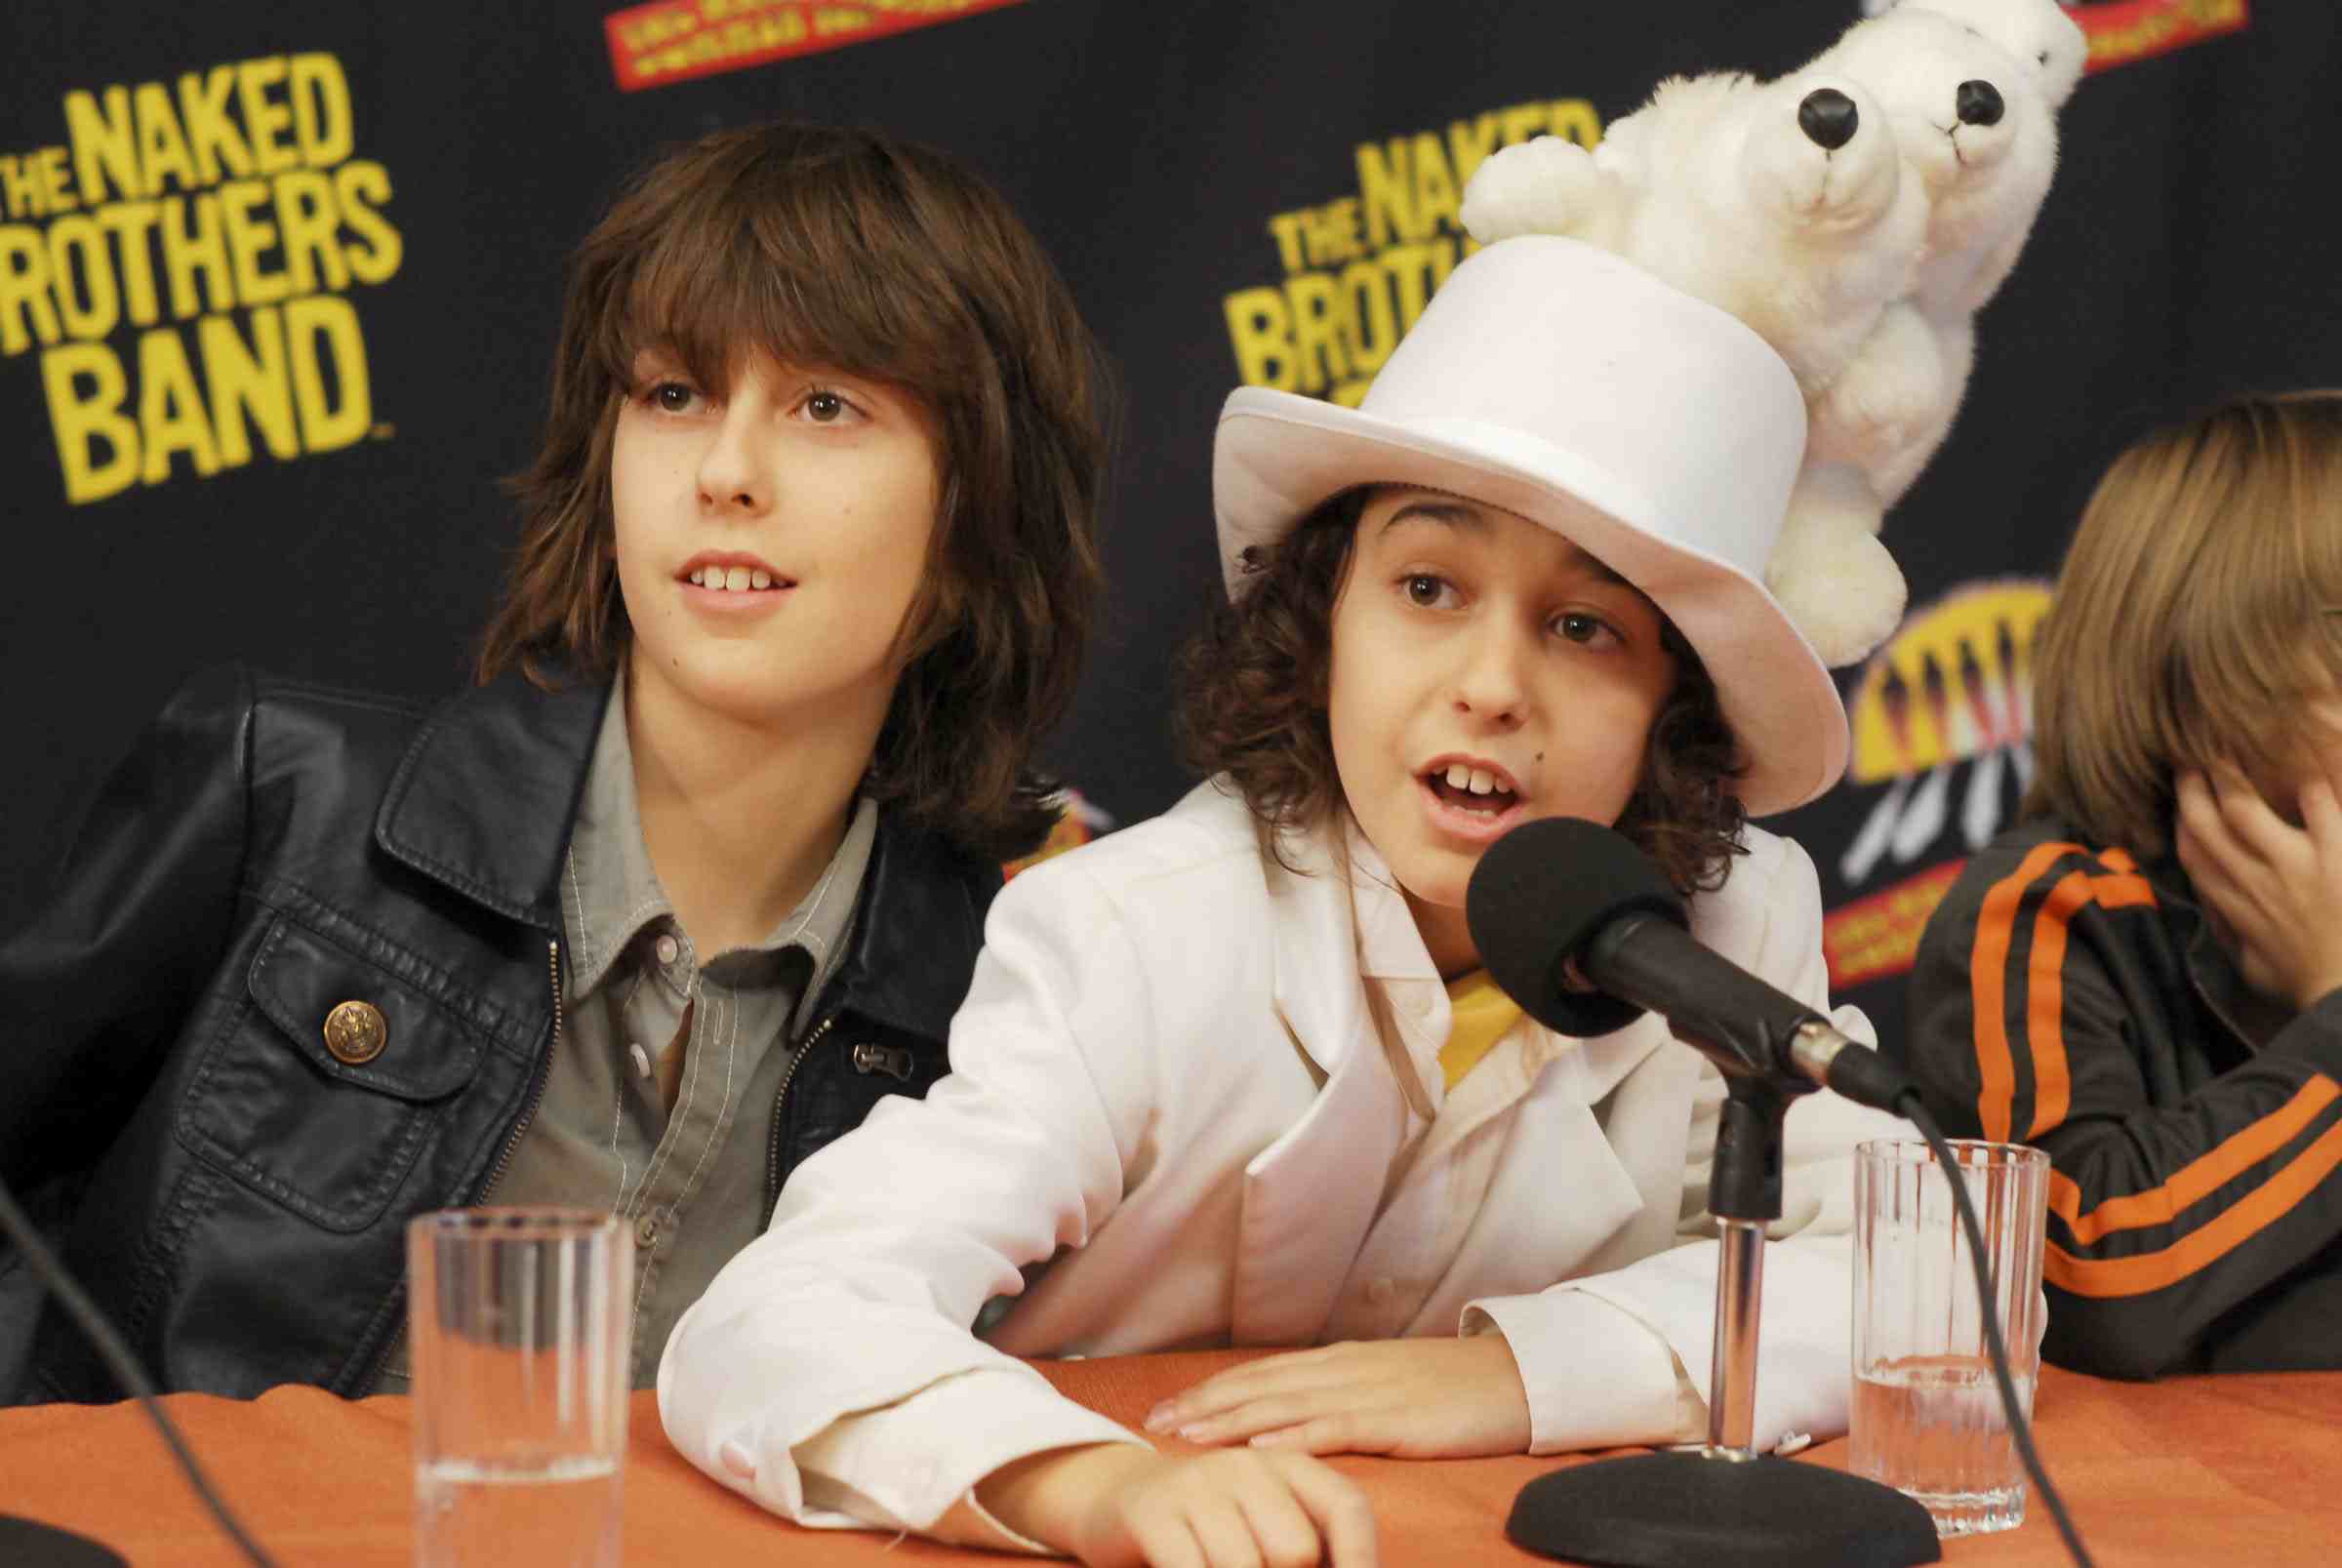 Leon williams naked brothers band